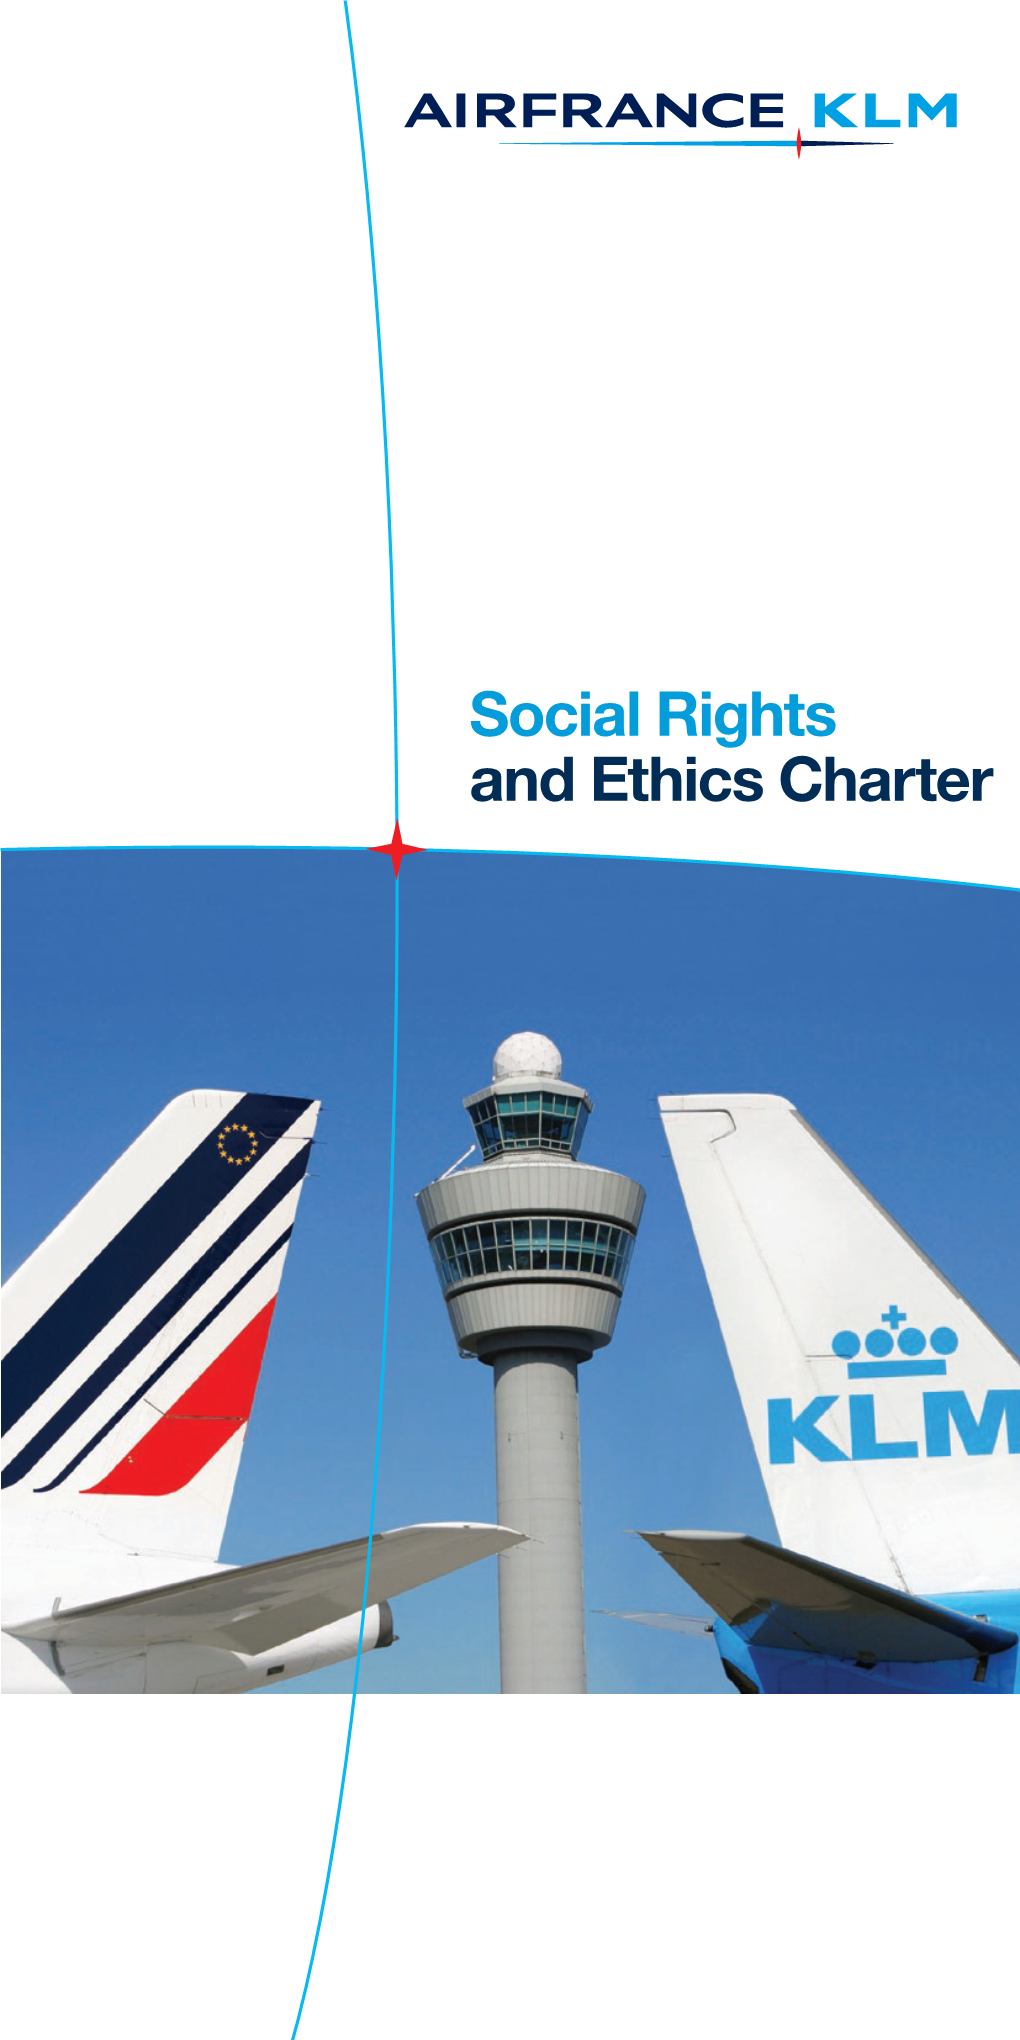 Social Rights and Ethics Charter Editorial by Alexandre De Juniac